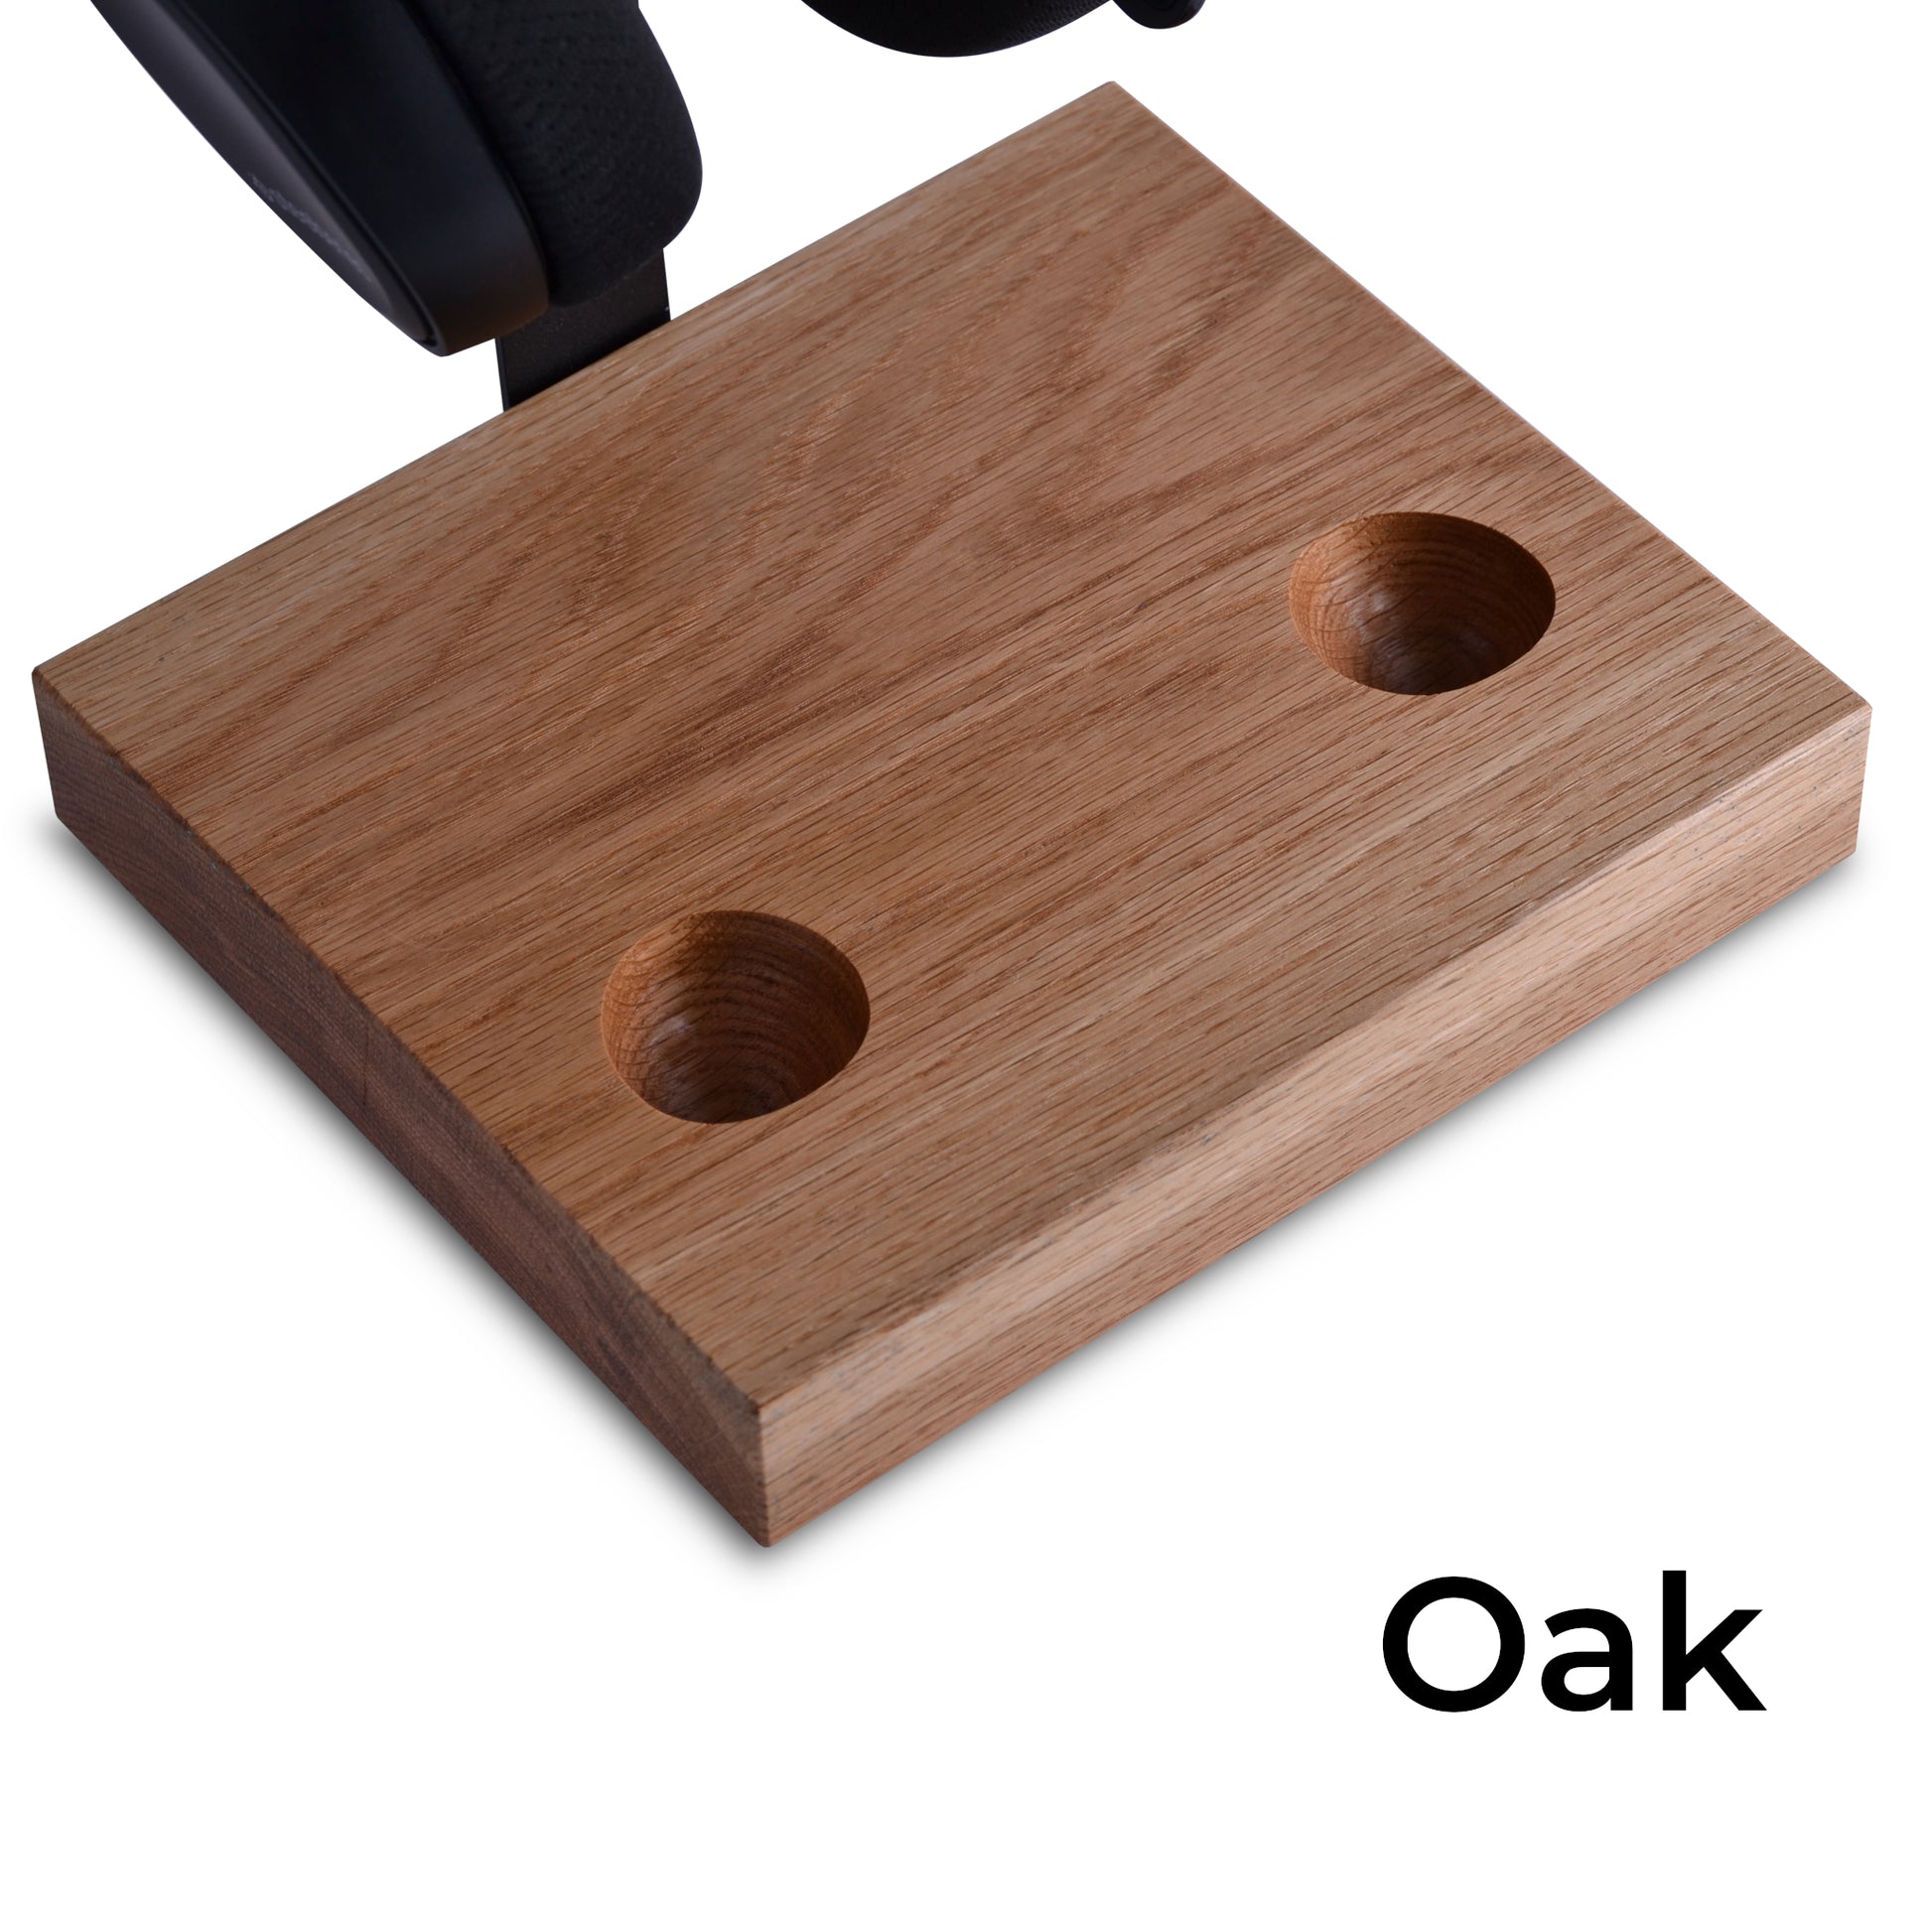 Oak version of headset and controller stand for Playstation 5 dualsense controller